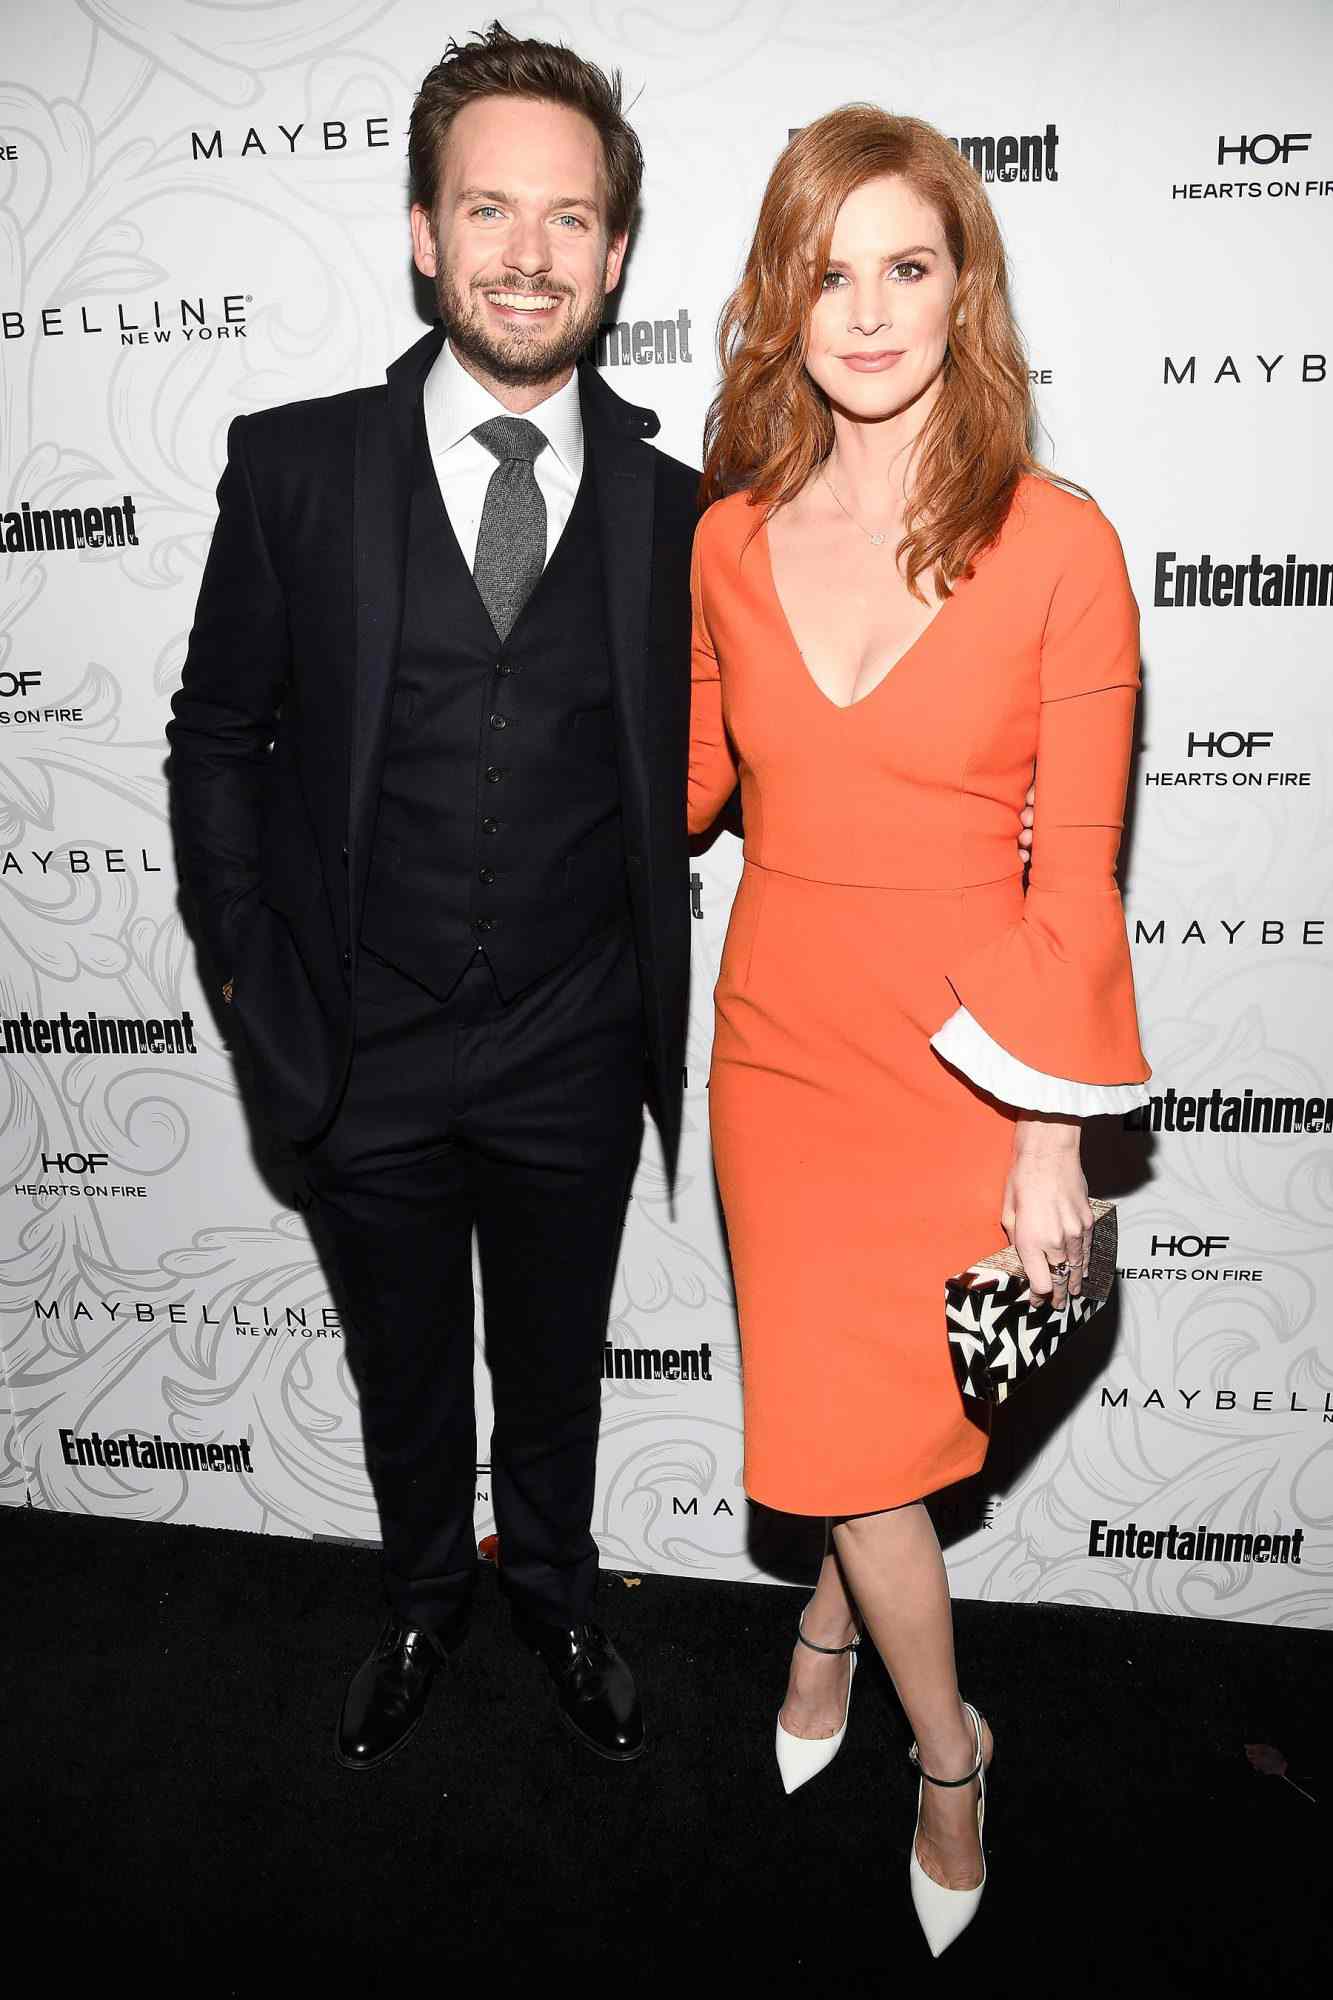 Entertainment Weekly Celebrates SAG Award Nominees at Chateau Marmont sponsored by Maybelline New York - Arrivals